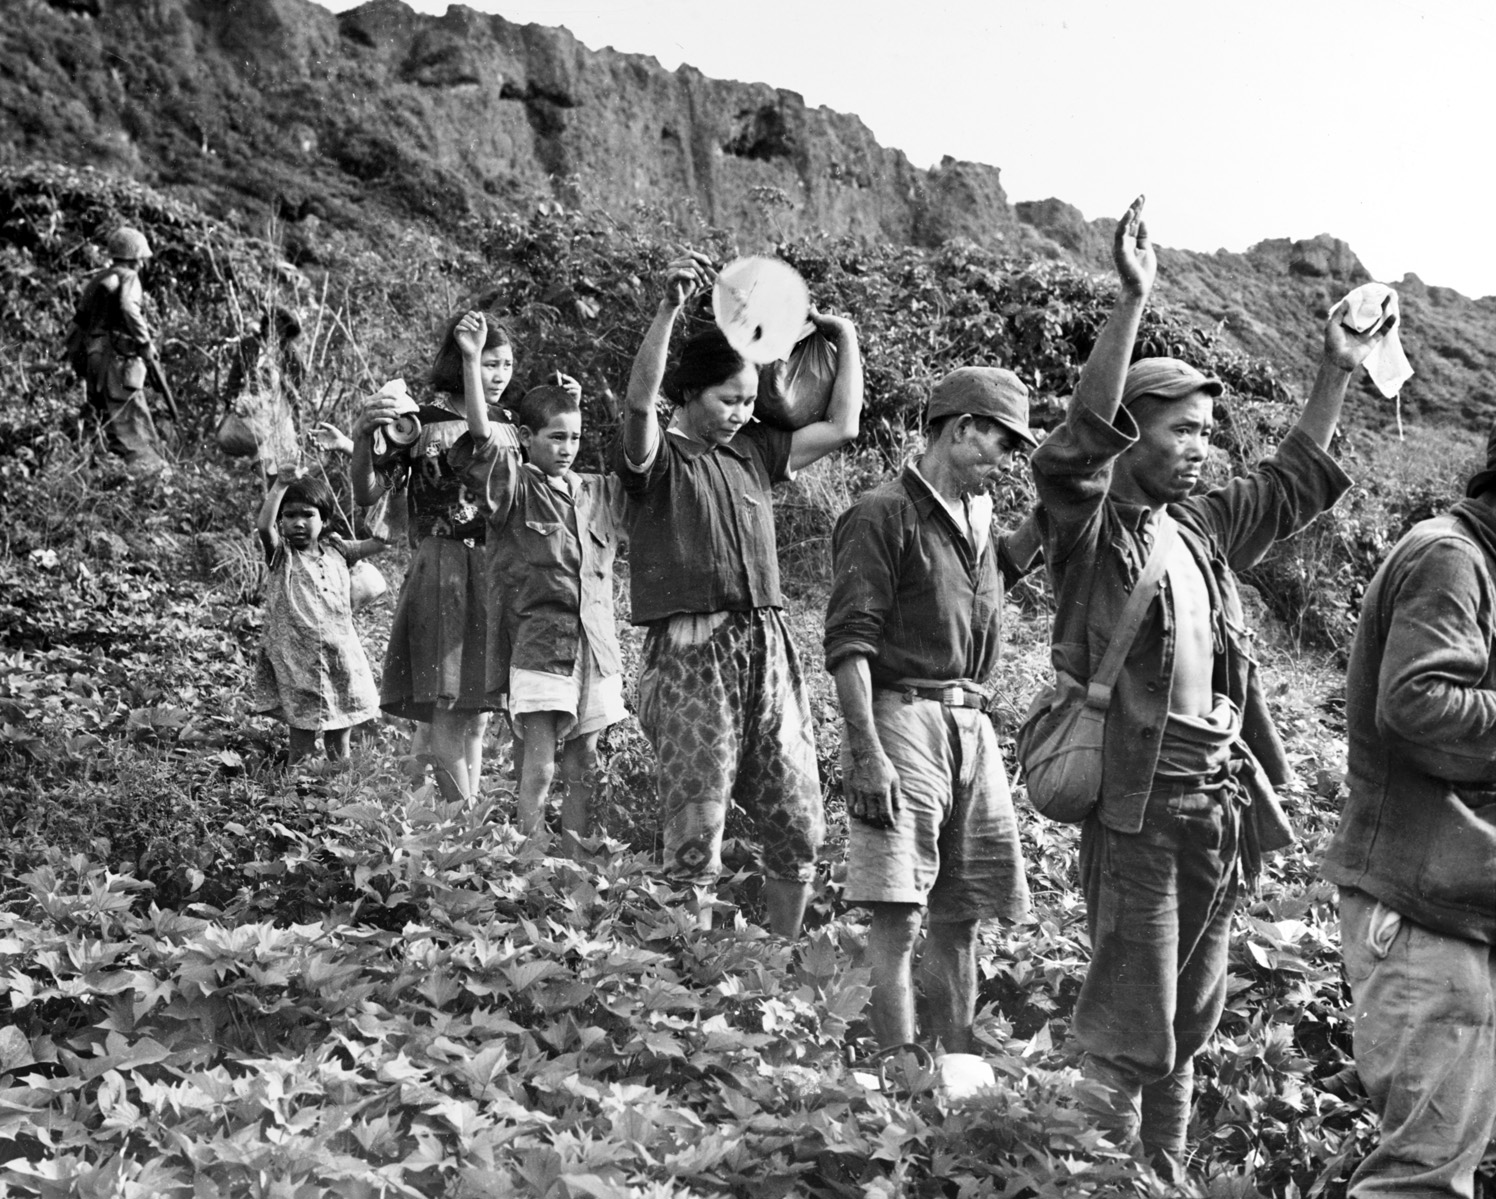 Japanese soldiers and Korean laborers, pressed into service with the Japanese military, emerge from hiding with their hands up. After 21 days of fighting in August and July of 1944, Guam was finally secured. 